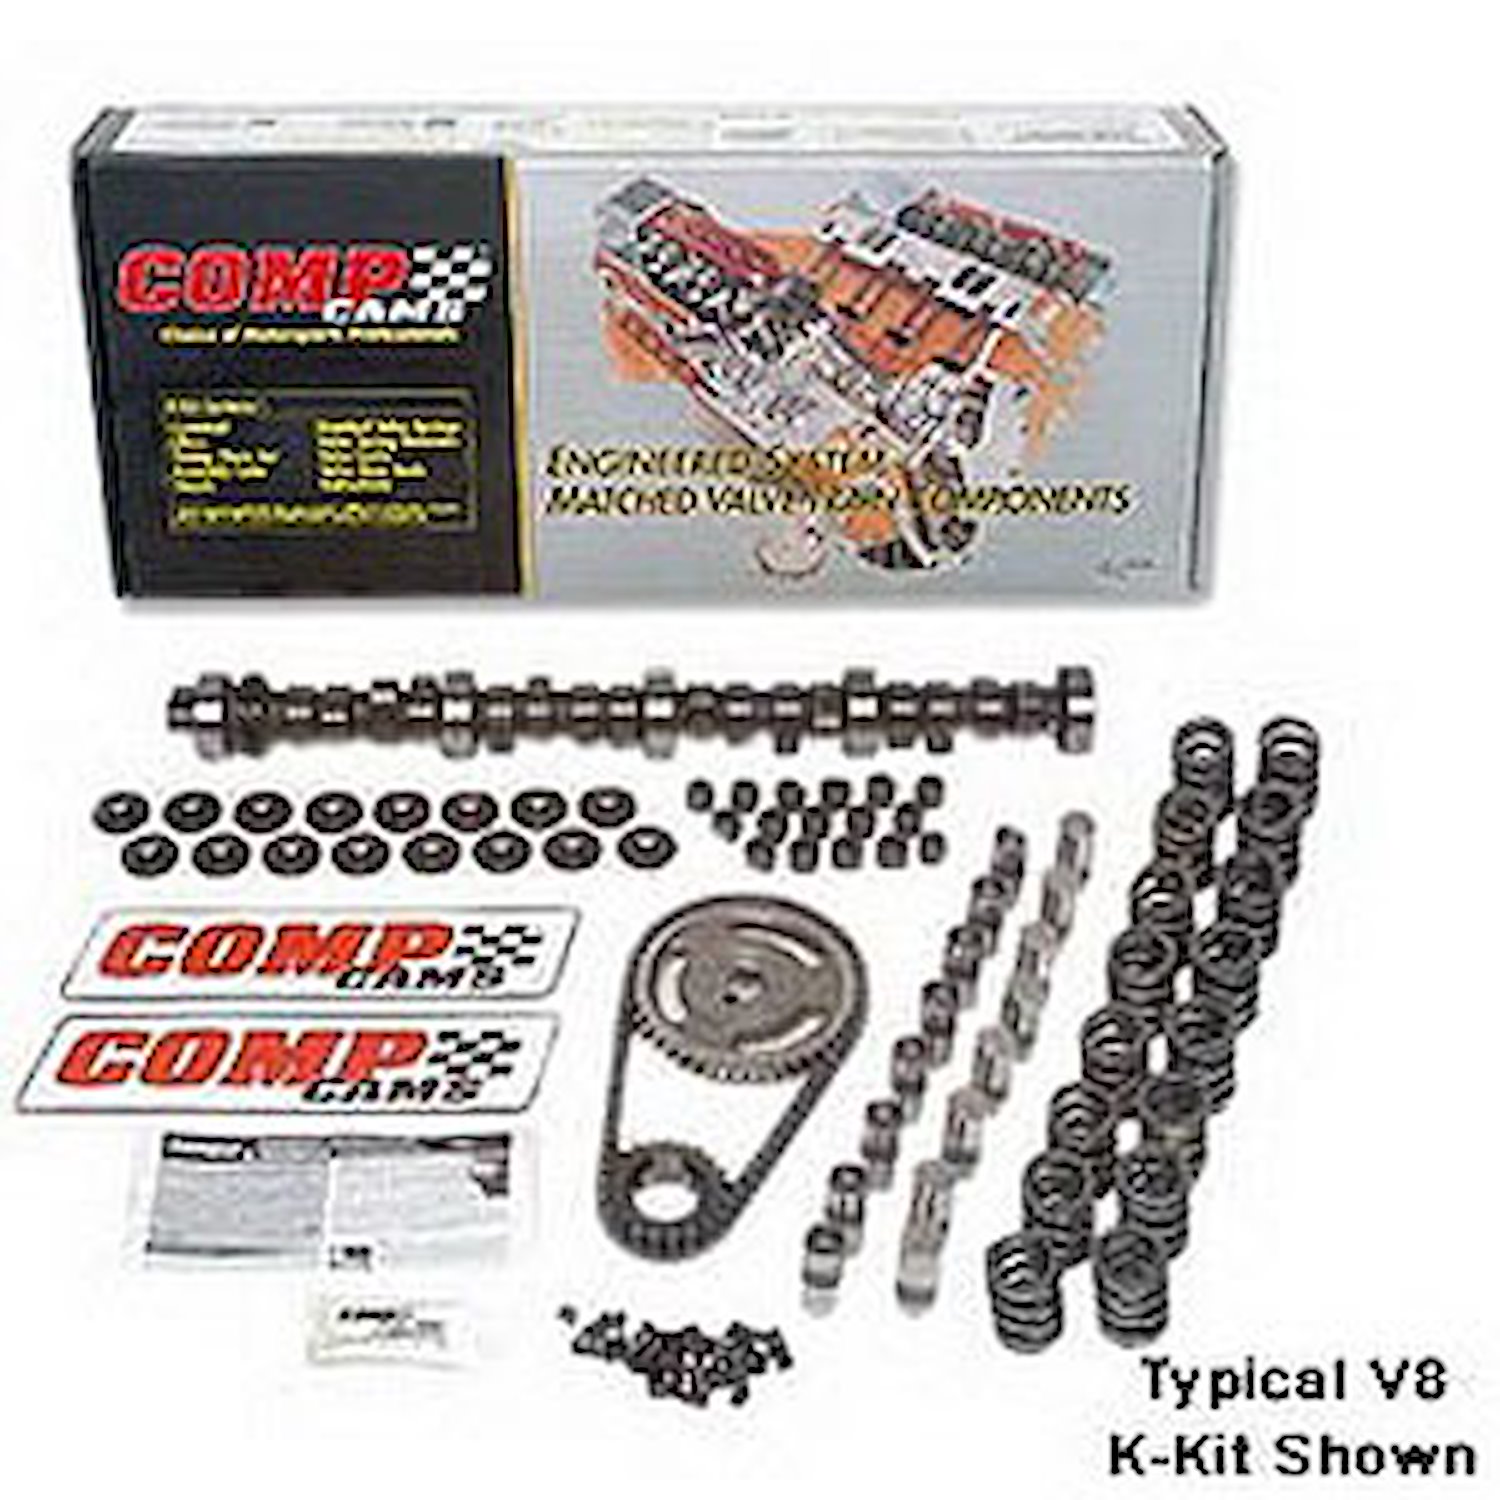 High Energy 240H Hydraulic Flat Tappet Camshaft Complete Kit Lift: .390" /.390" Duration: 240°/248° RPM Range: 500-4500